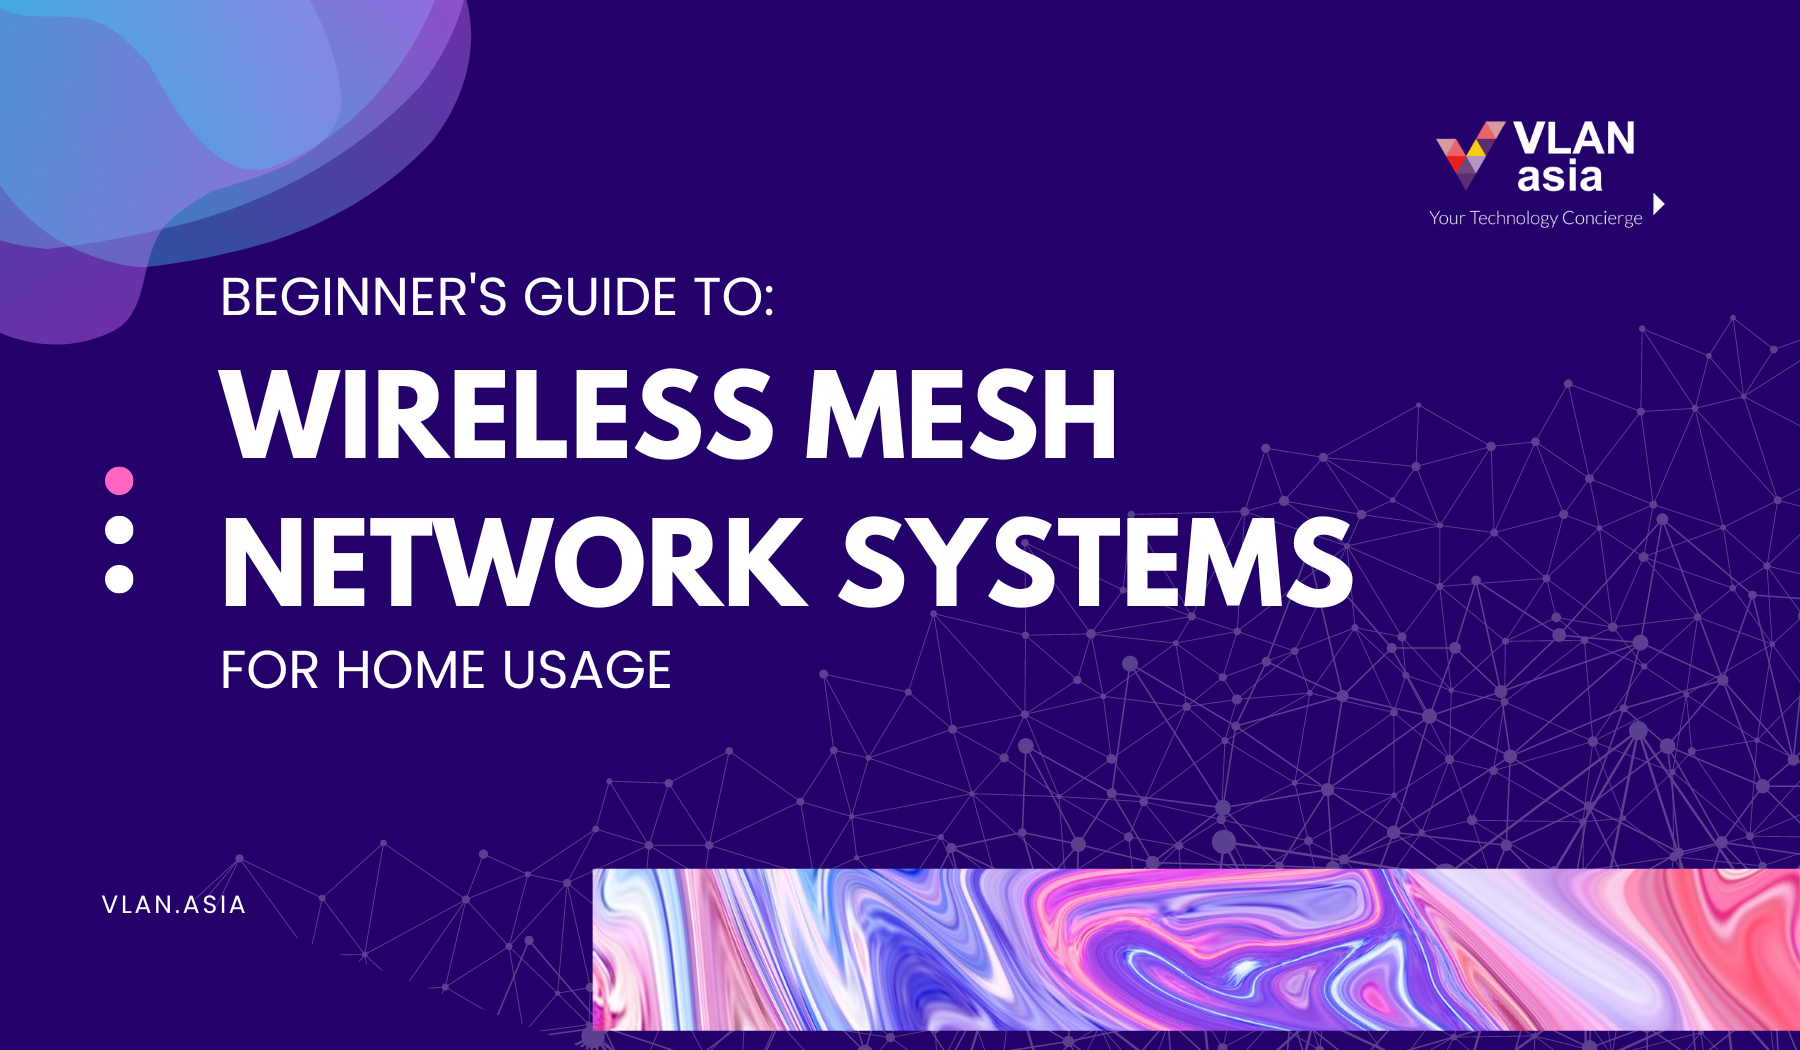 Guide to Wireless Mesh Network Systems for Home Use